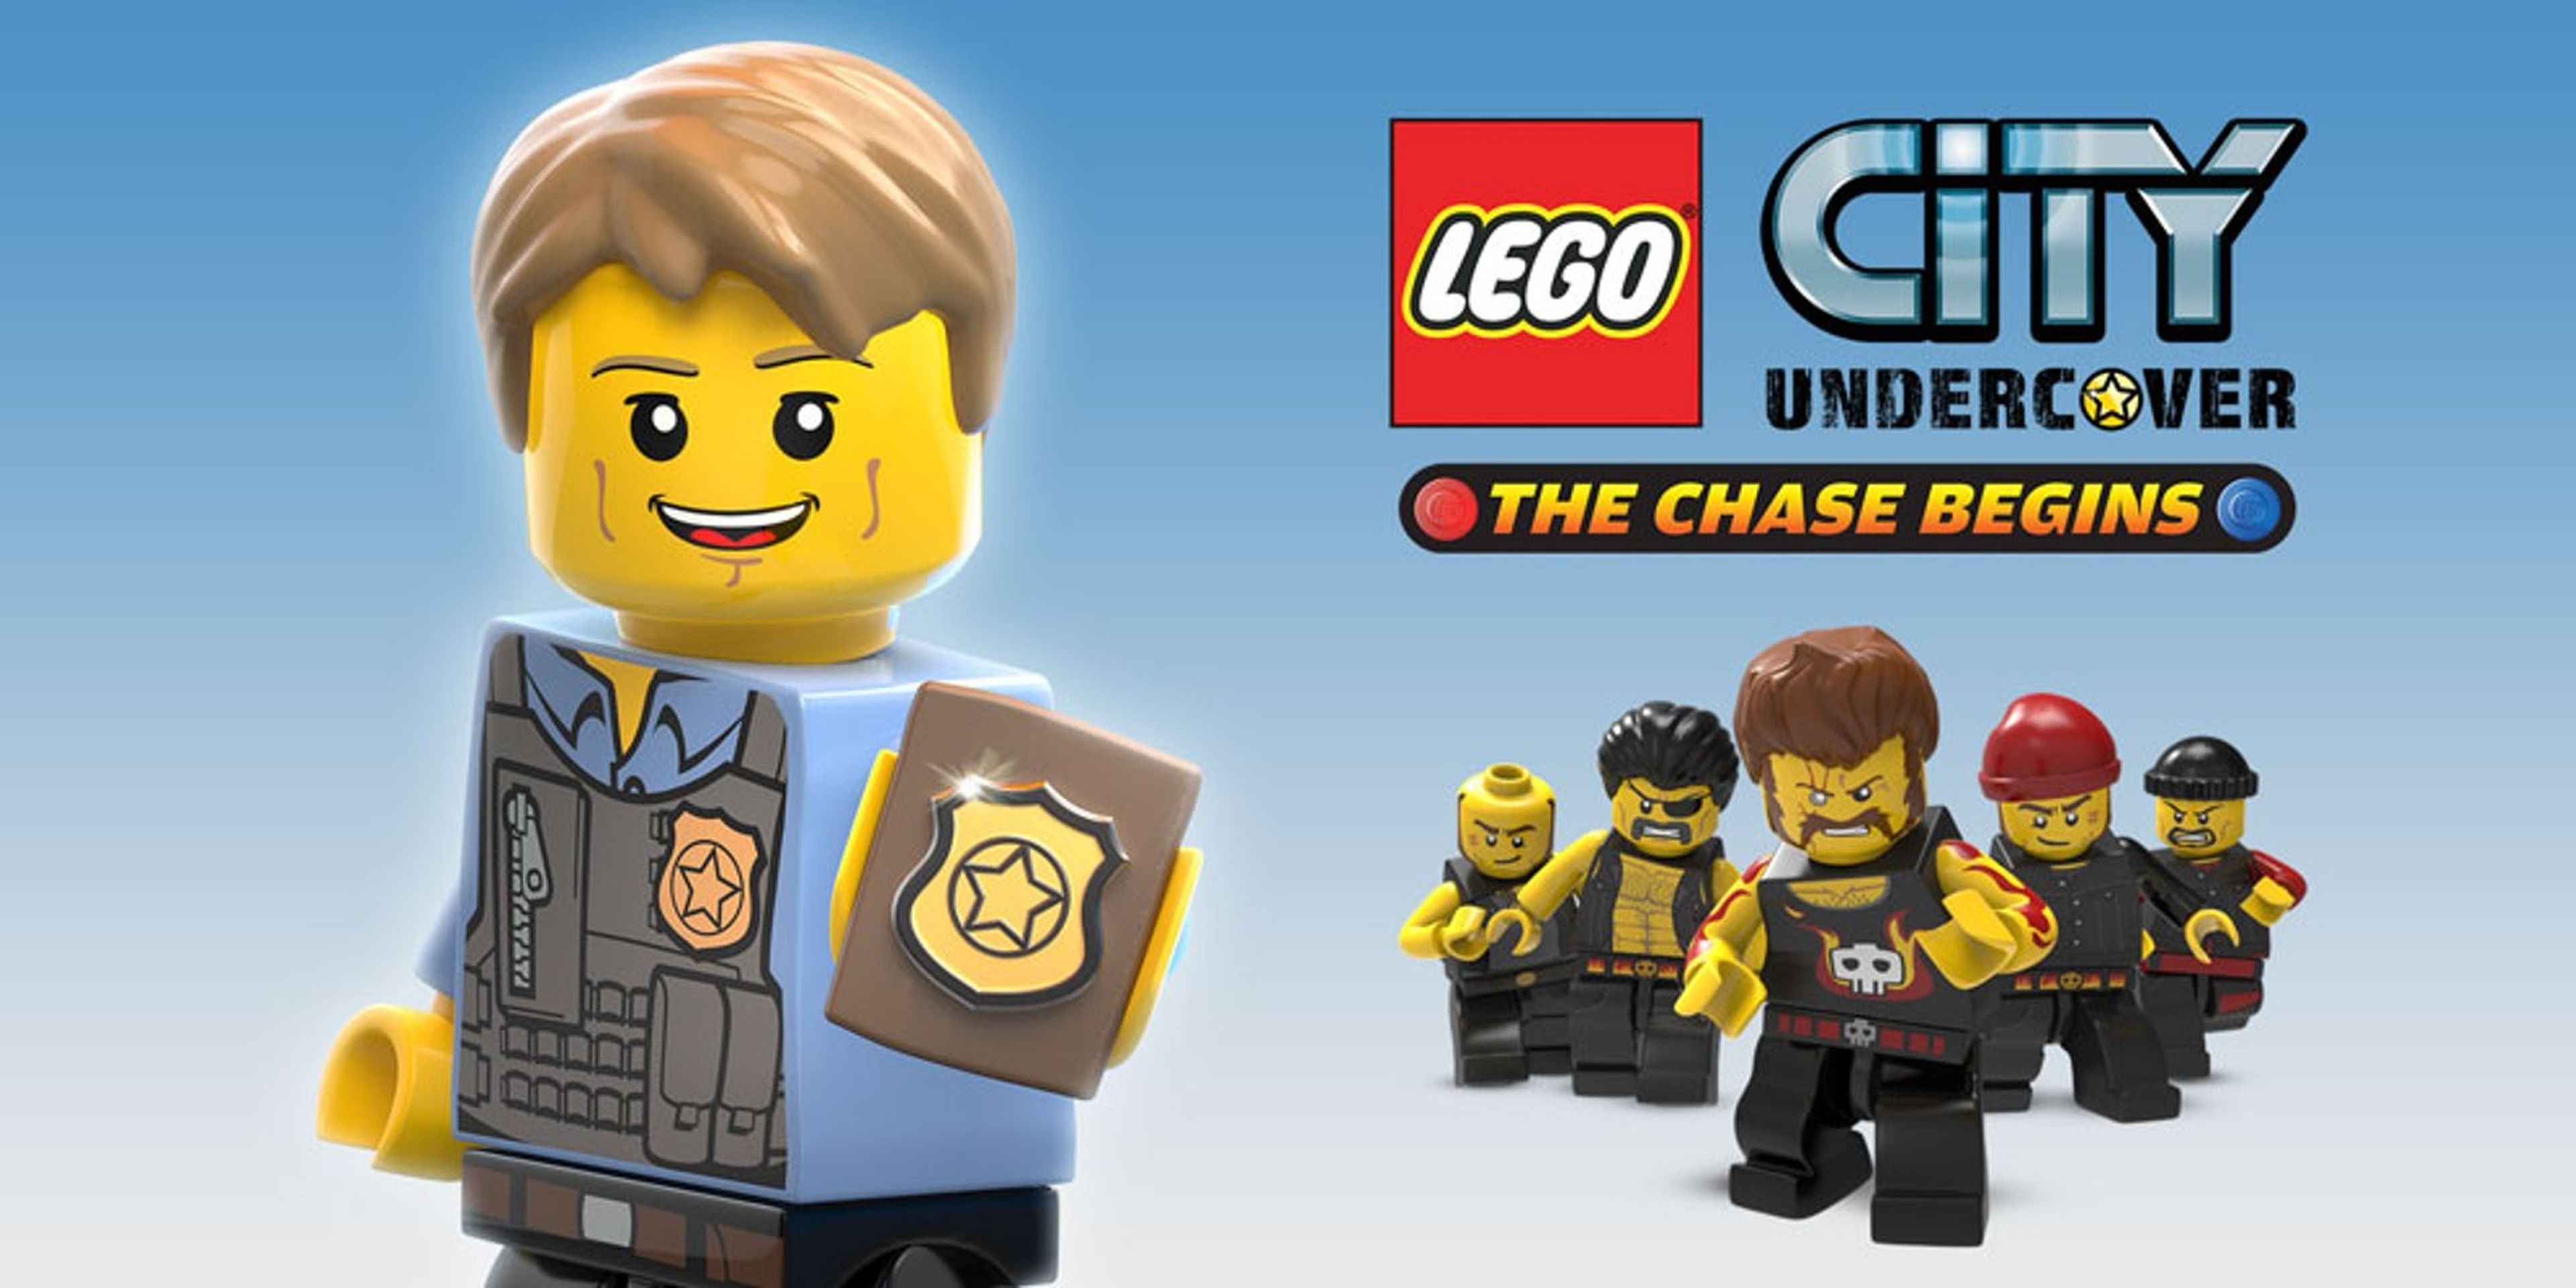 LEGO City Undercover the chase begins